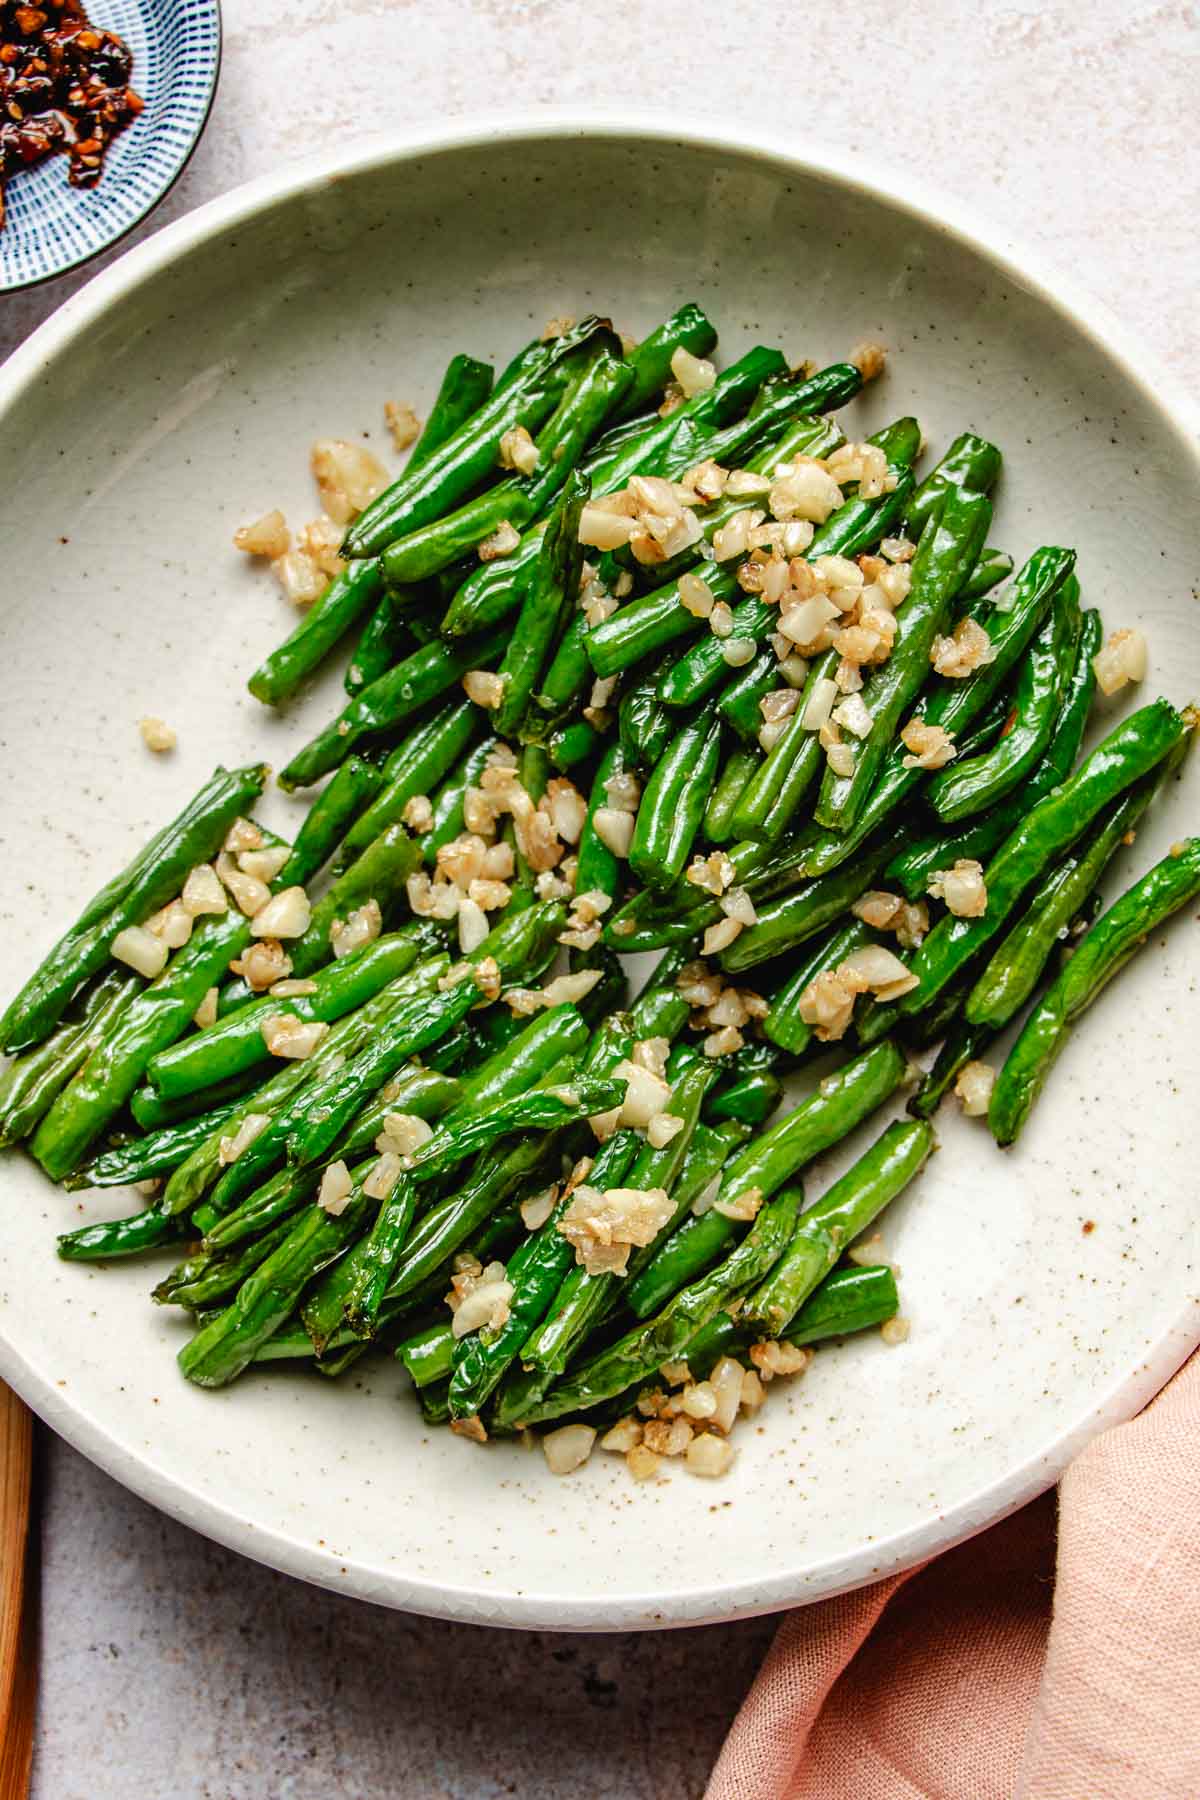 Image shows Din tai fung copycat green beans with crisp exterior and topped with loads of minced garlic served in a white plate.